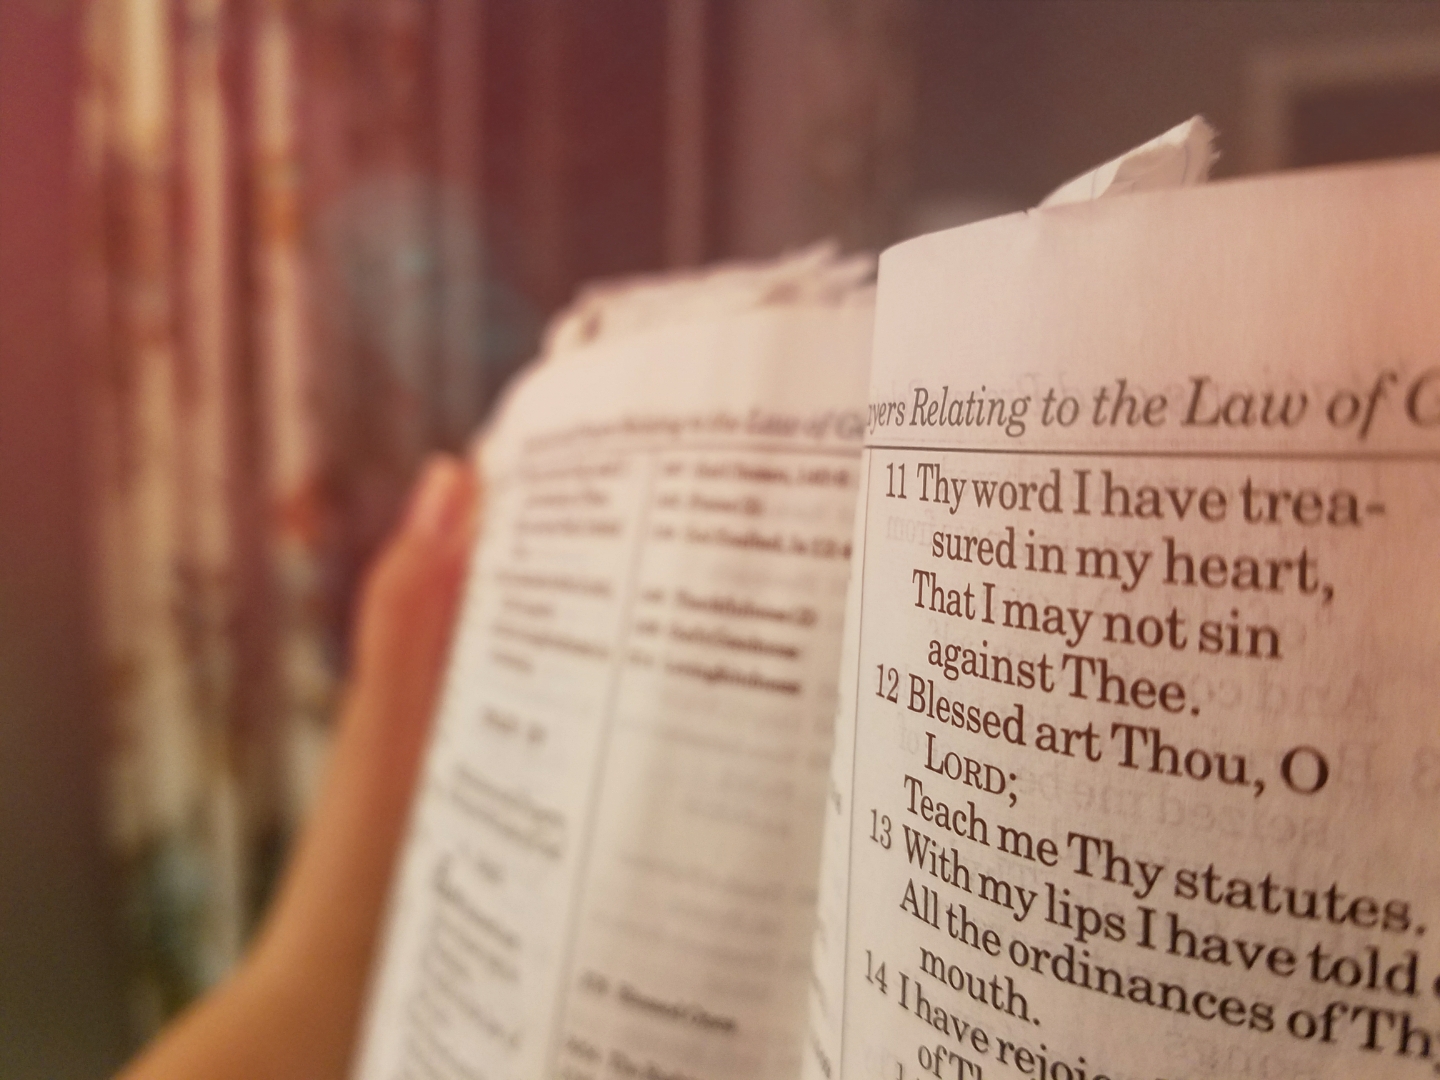 Today’s Guide — 09.11.17 — God’s Word